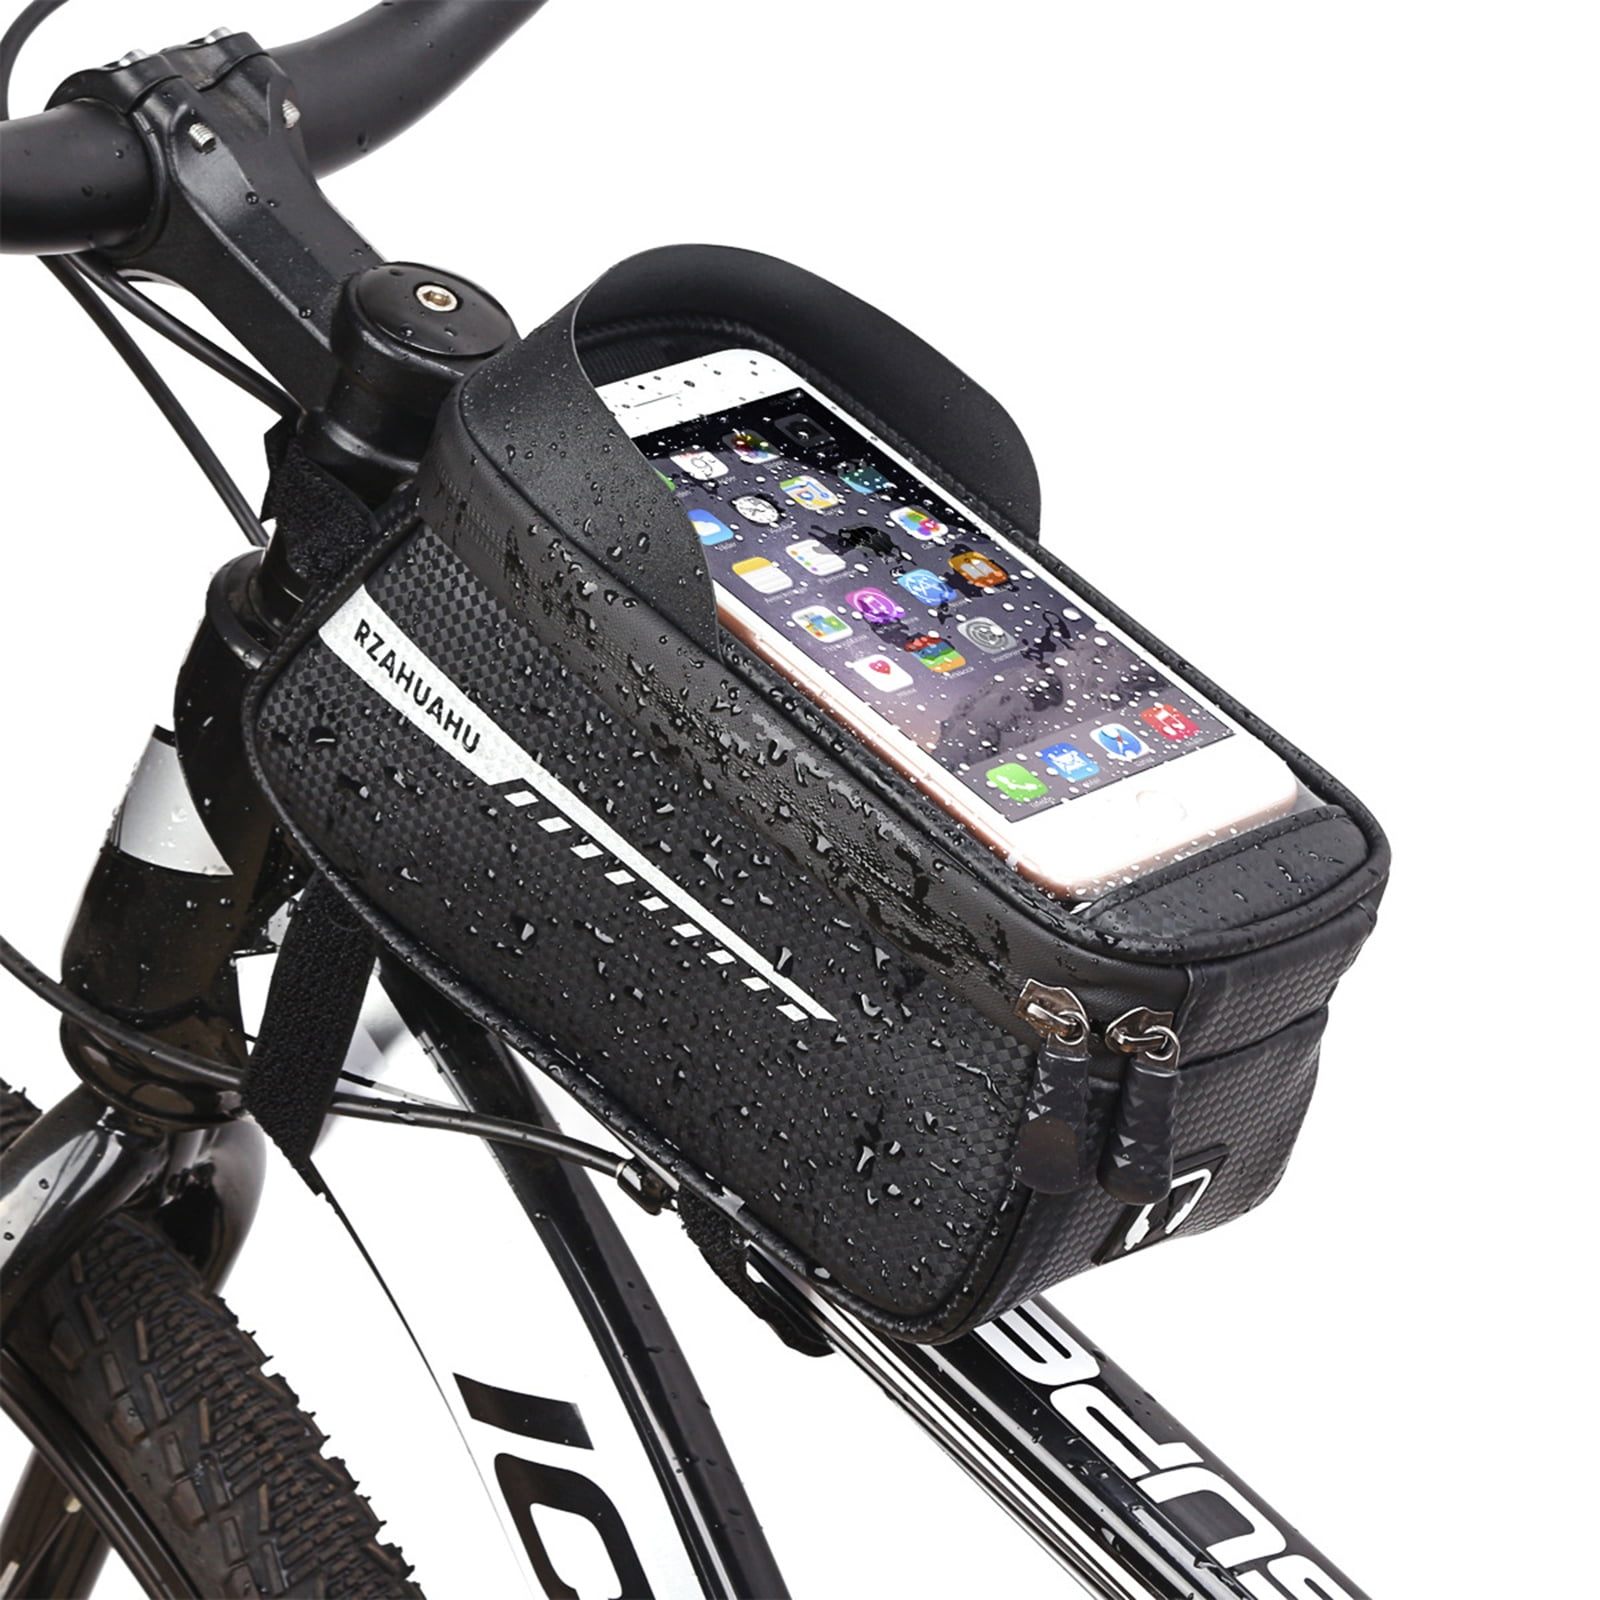 Shipwreck software reptiles Waterproof Bicycle Phone Mount Bags Front Frame Top Tube Bag with  Touchscreen Phone Holder Case Cycling Bike Tool Storage Bag Pack -  Walmart.com